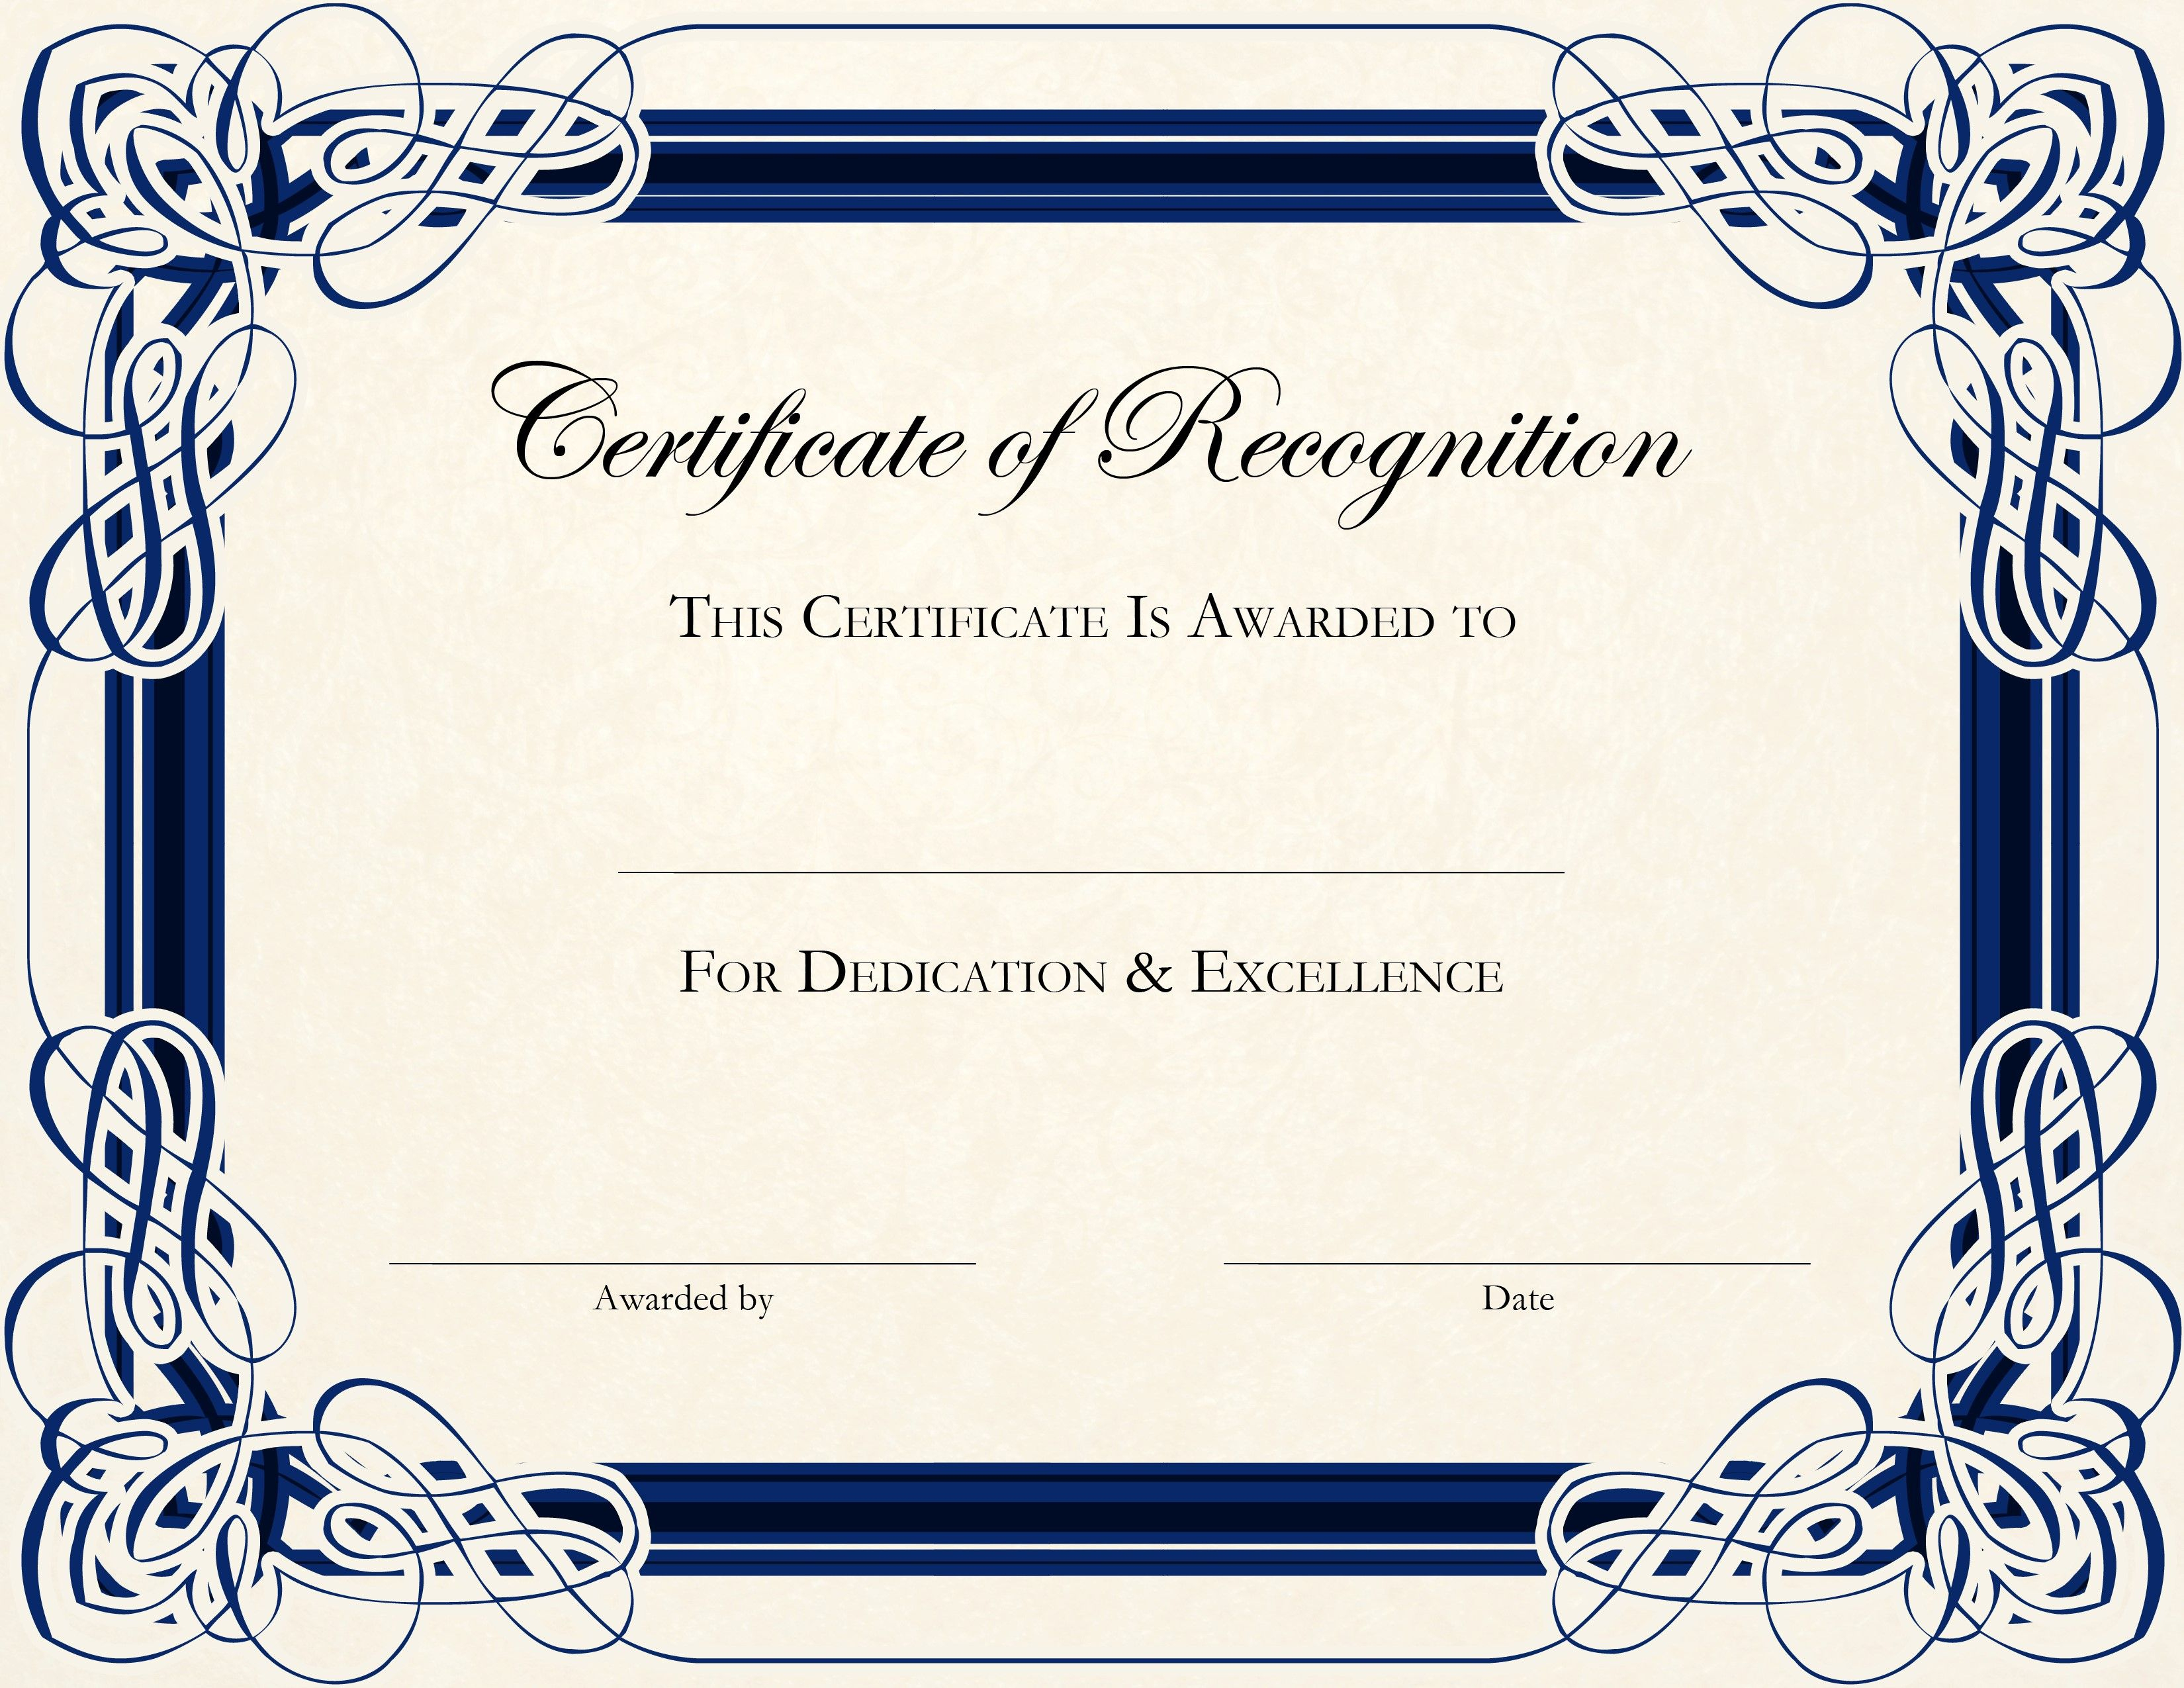 Free Printable Certificate Templates For Teachers | Besttemplate123 - Free Printable Certificate Templates